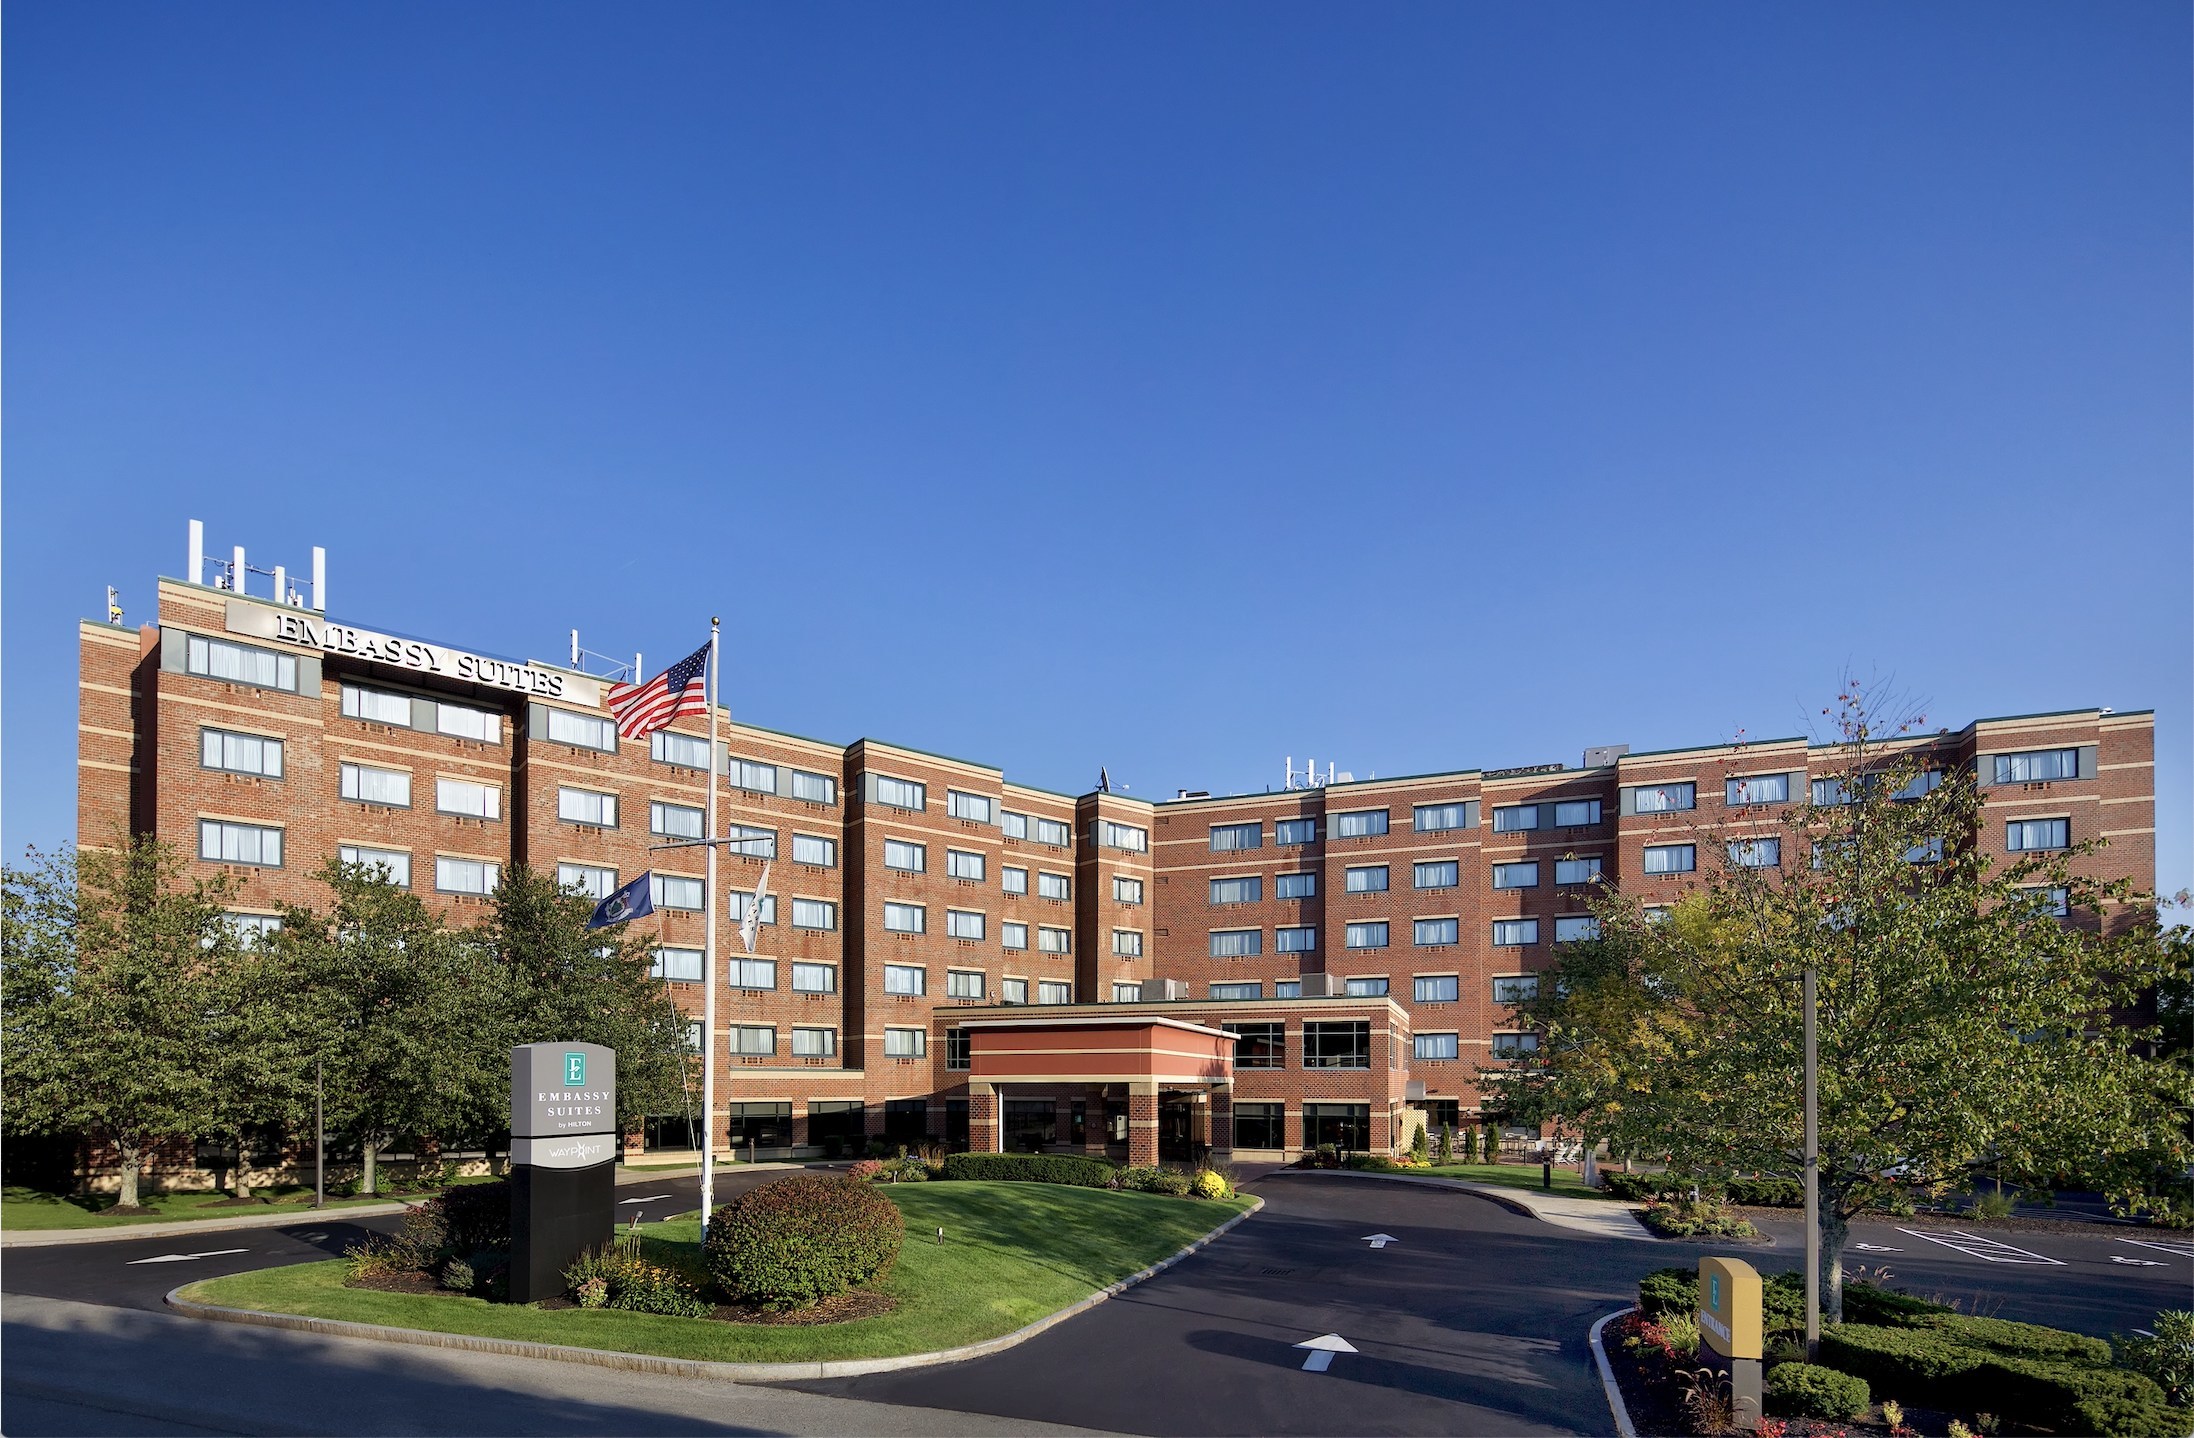 Aam 15 Announces The Acquisition Of Its Eighth Hotel